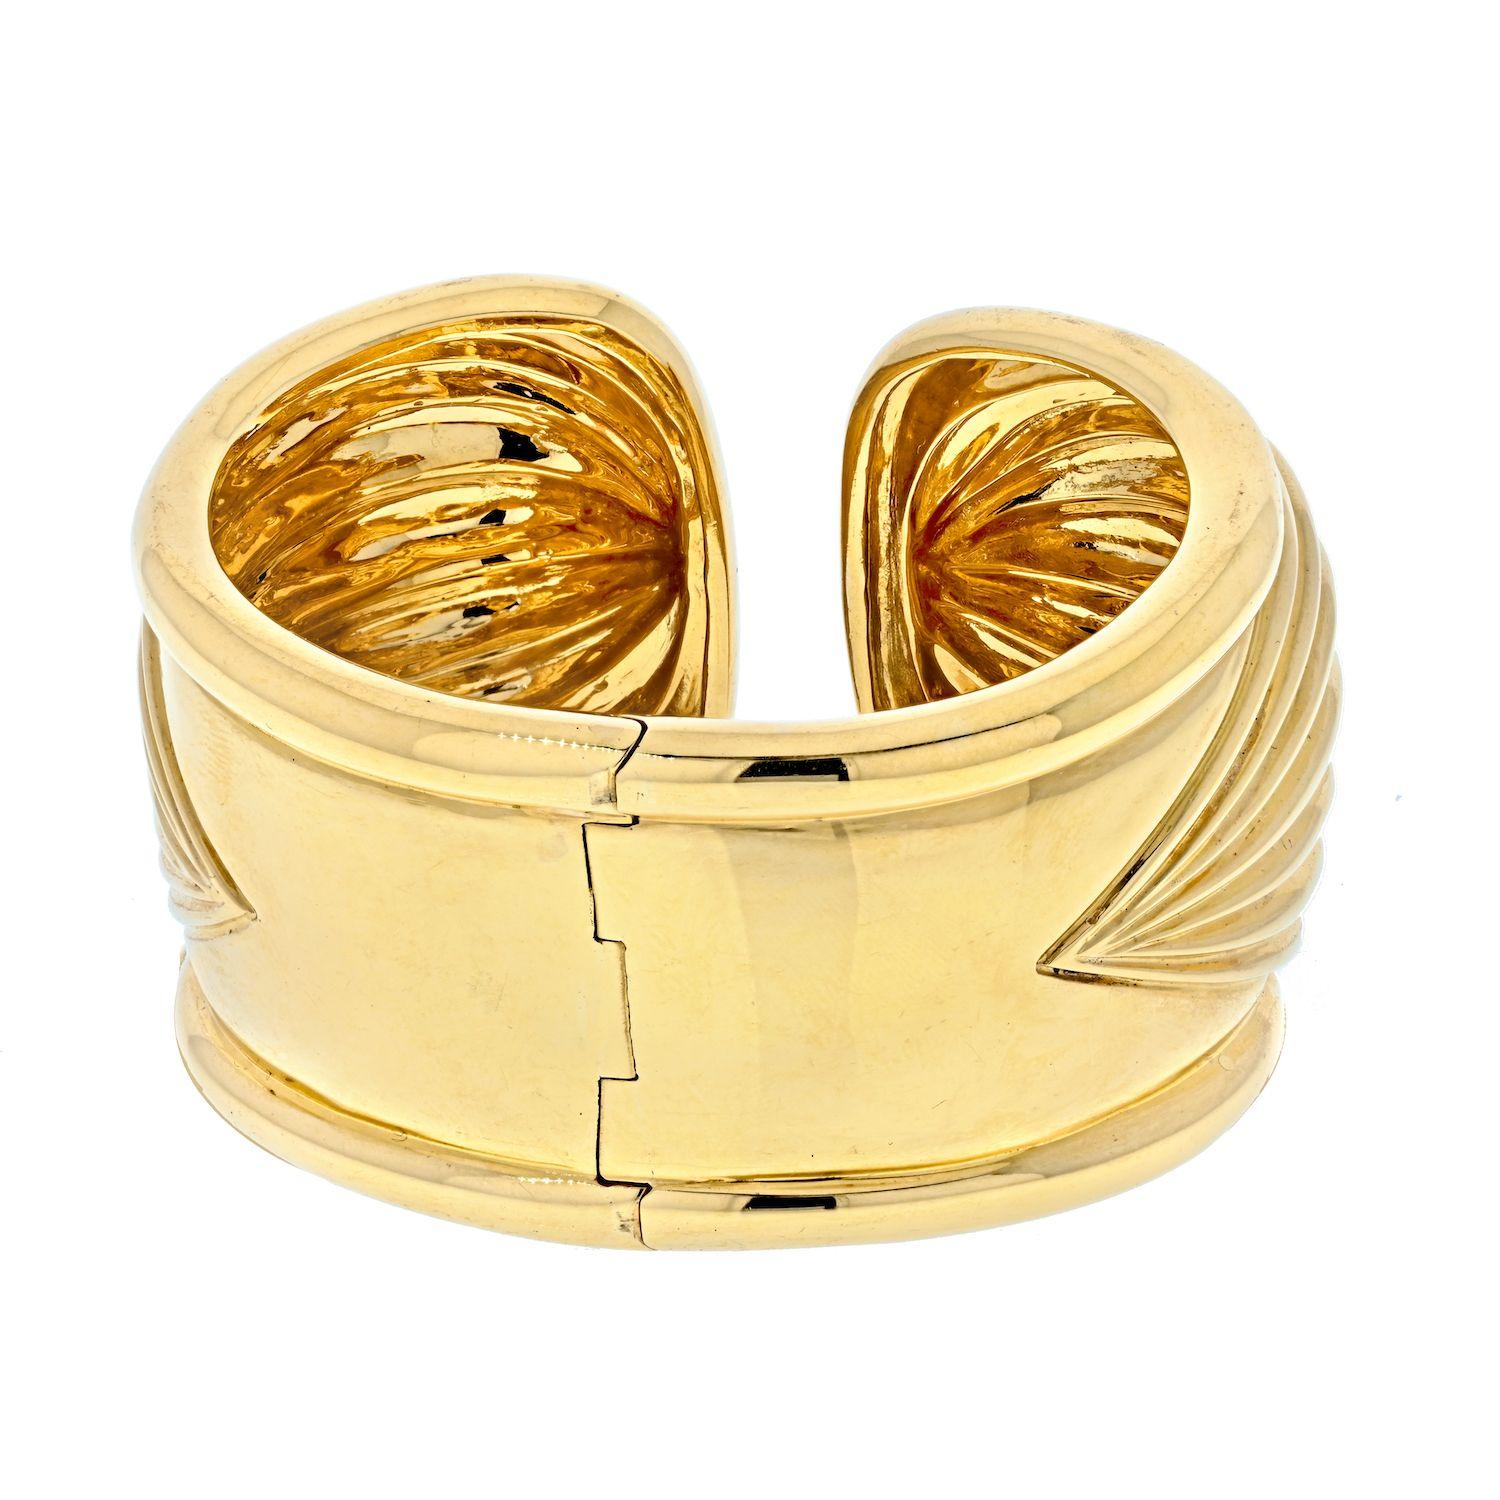 This very imposing fluted, 18k gold cuff bracelet by David Webb measures a full 1.7 inch wide at it's front, tapering down to 1 inches at the rear. 

The bracelet weighs over 100 grams in 18k gold creating a striking appearance. Hinged in the back